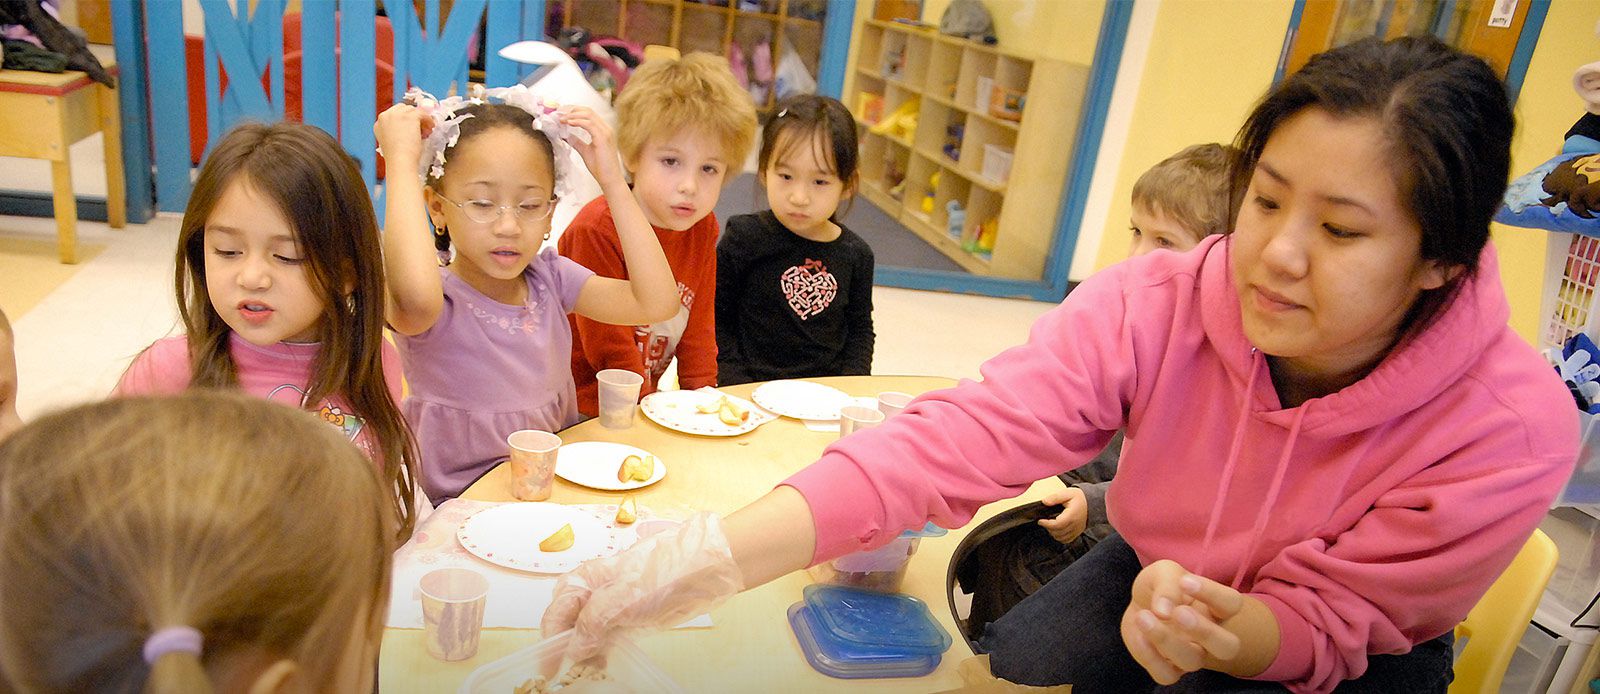 A childcare provider serves snacks to the children at her center.